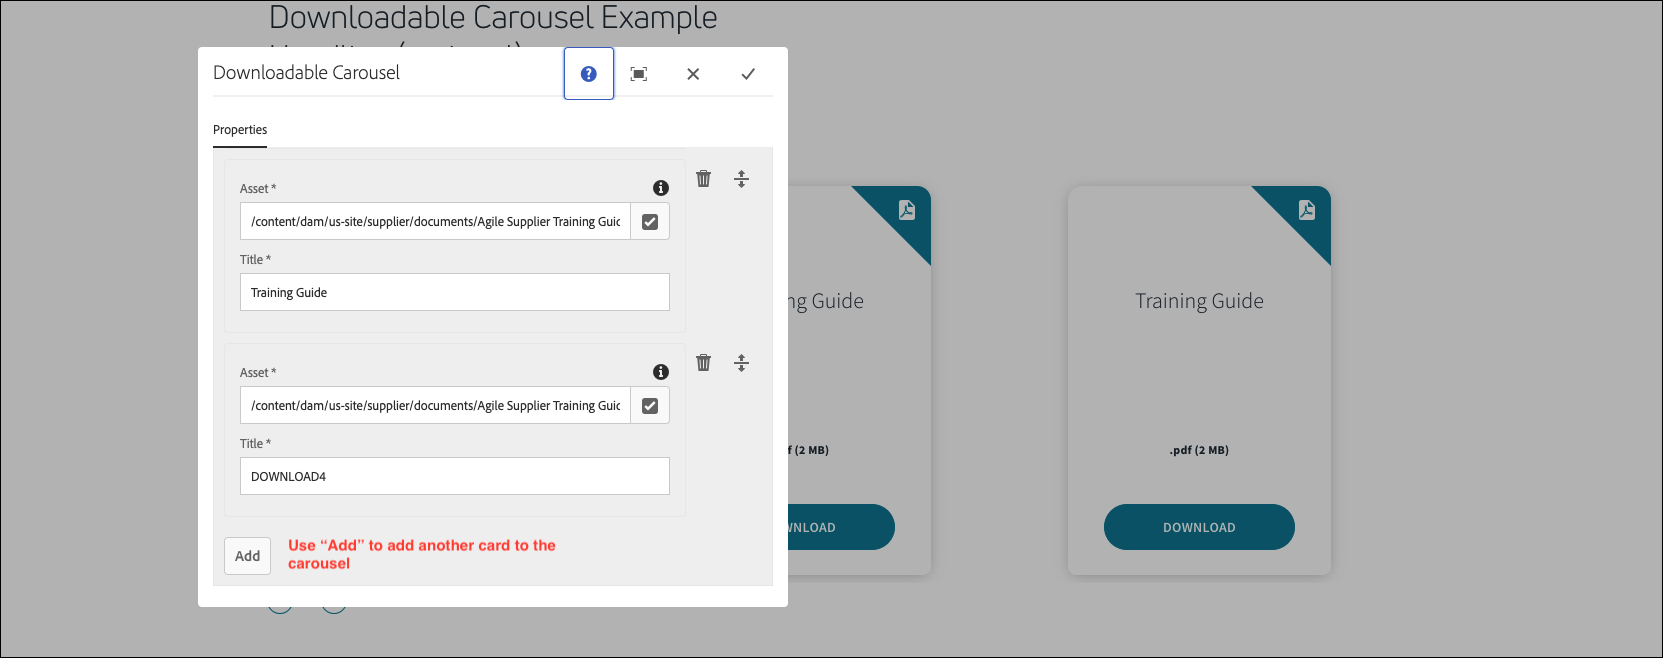 Downloadable Carousel Authoring Experience Two